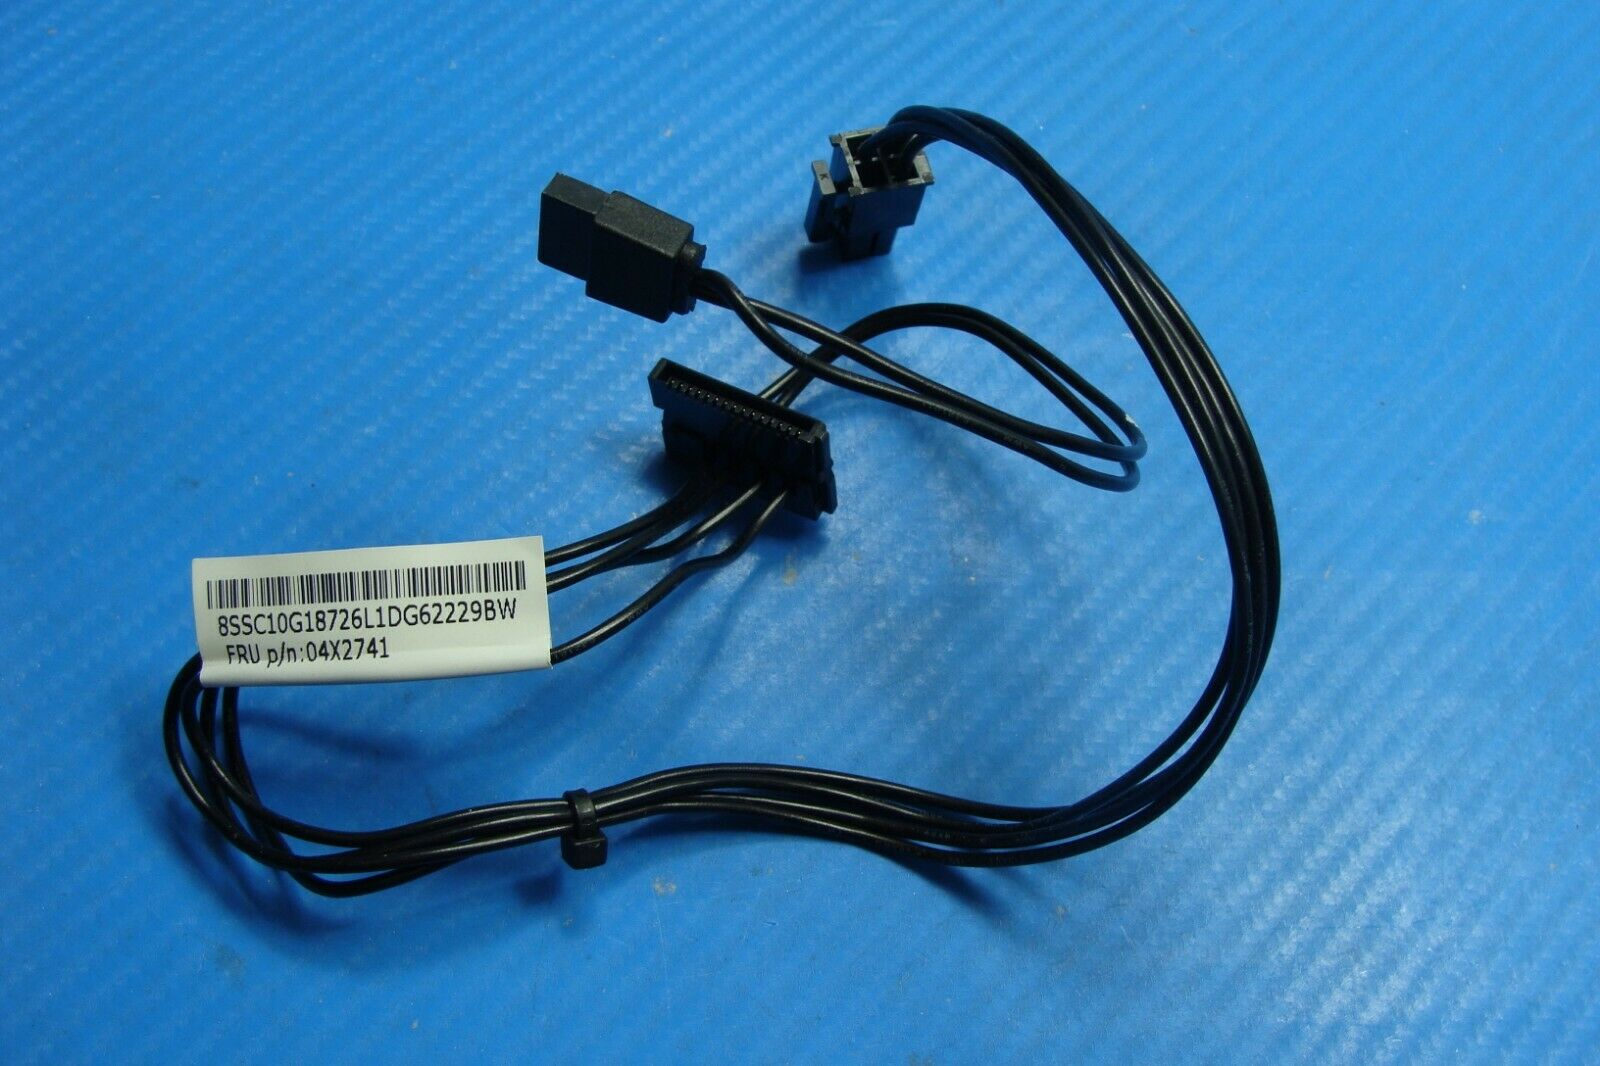 Lenovo Thinkcentre M800 Genuine Desktop Odd Hdd Power Coonector Cable 04X2741 - Laptop Parts - Buy Authentic Computer Parts - Top Seller Ebay